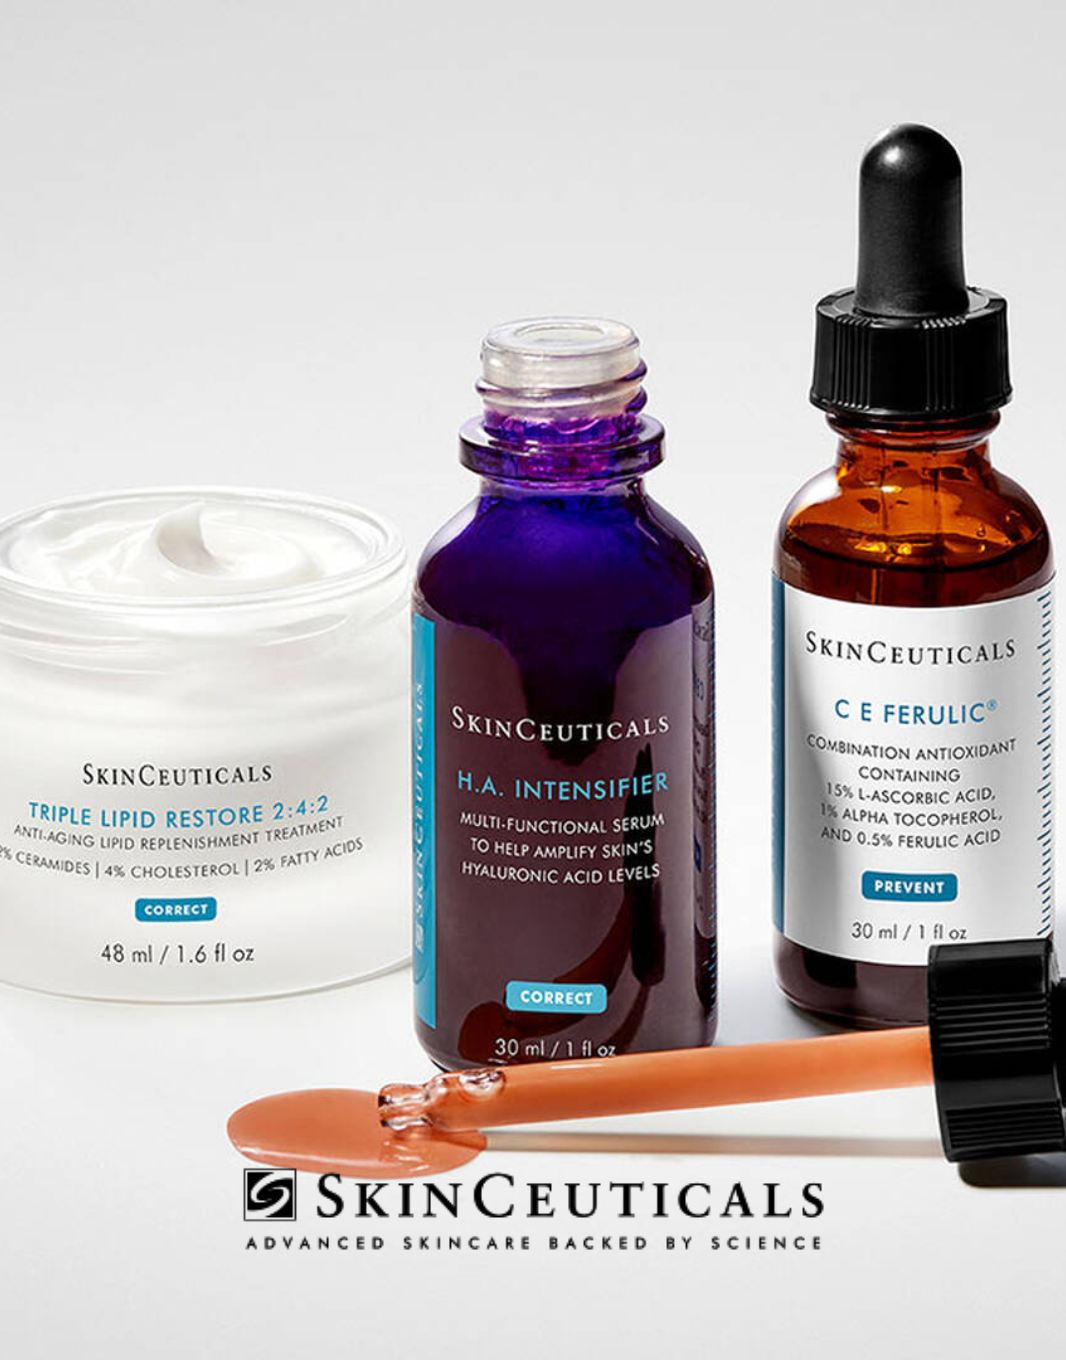 Skinceuticals skincare products